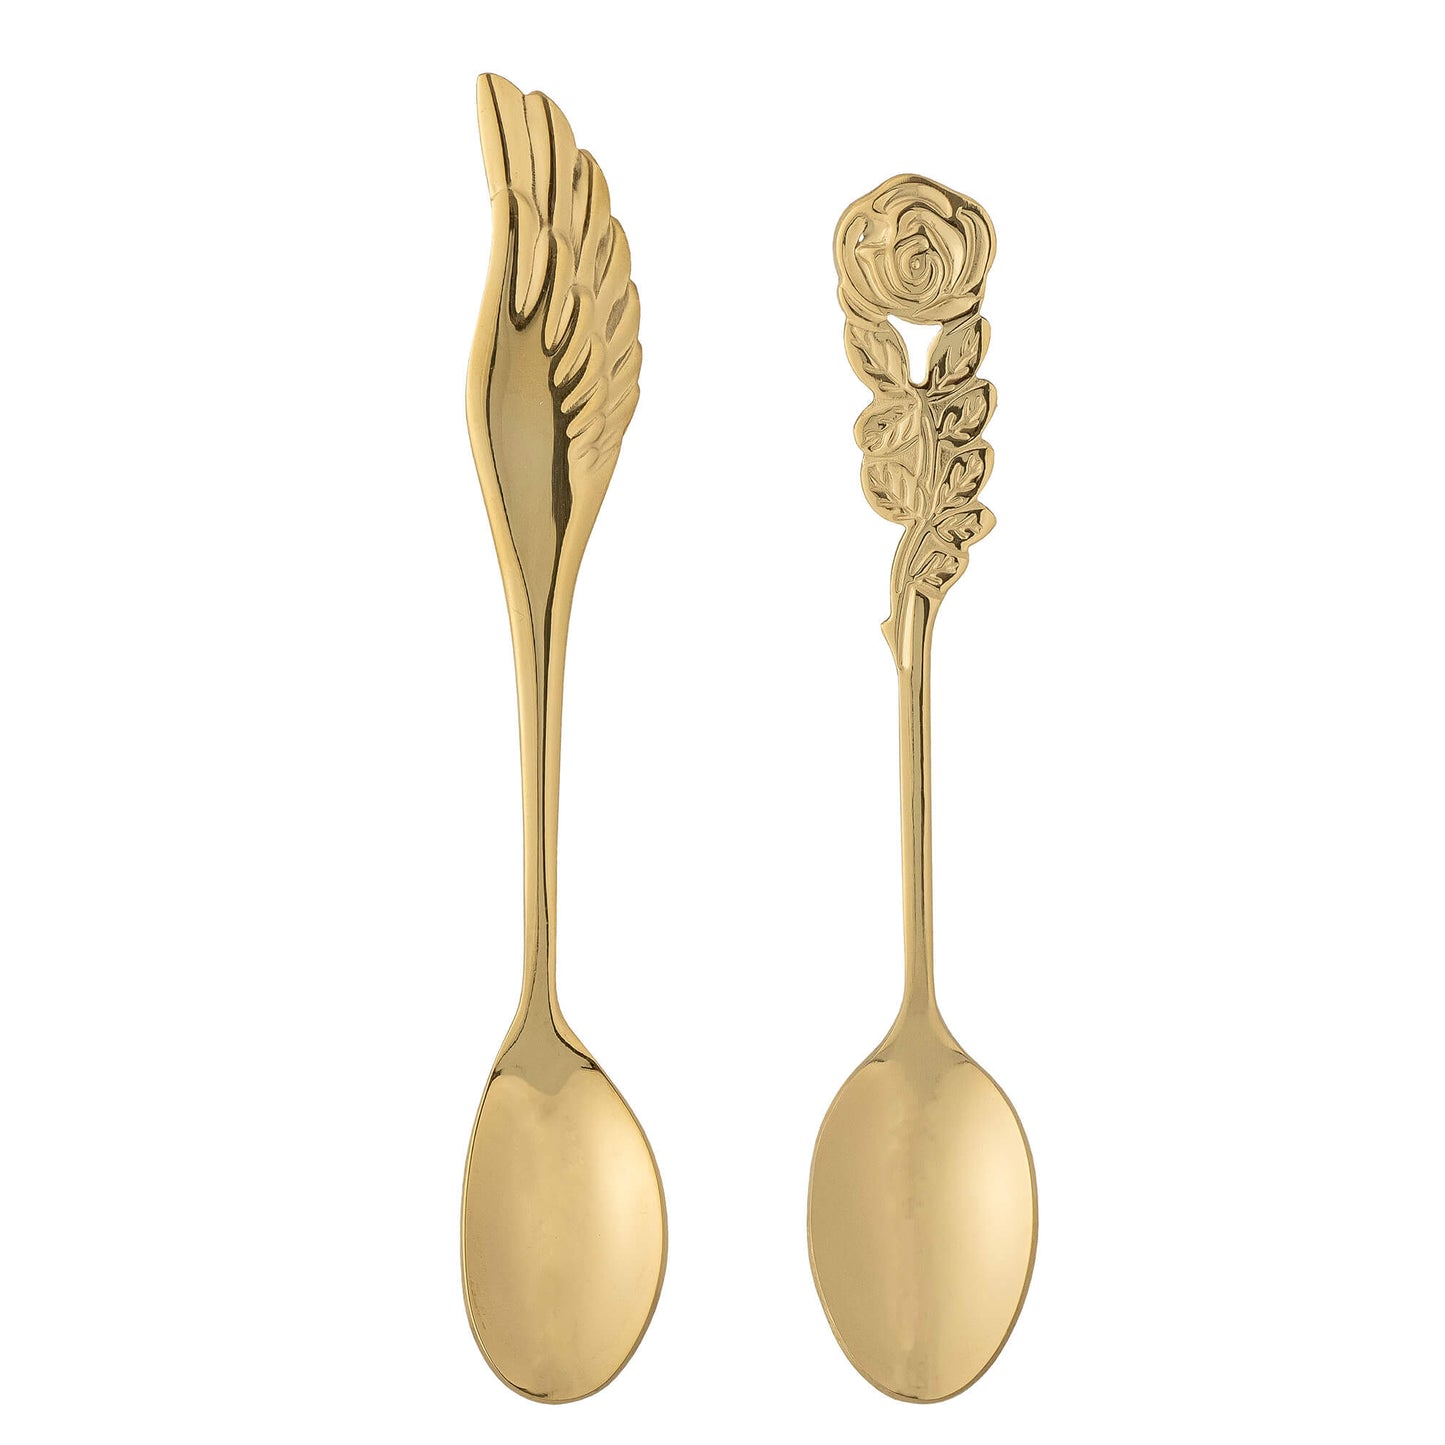 elegant Liani Spoons by Bloomingville, showcasing its fine craftsmanship, gold look, and unique details. These spoons are made of stainless steel and measures 14cm in length and 2cm in width.